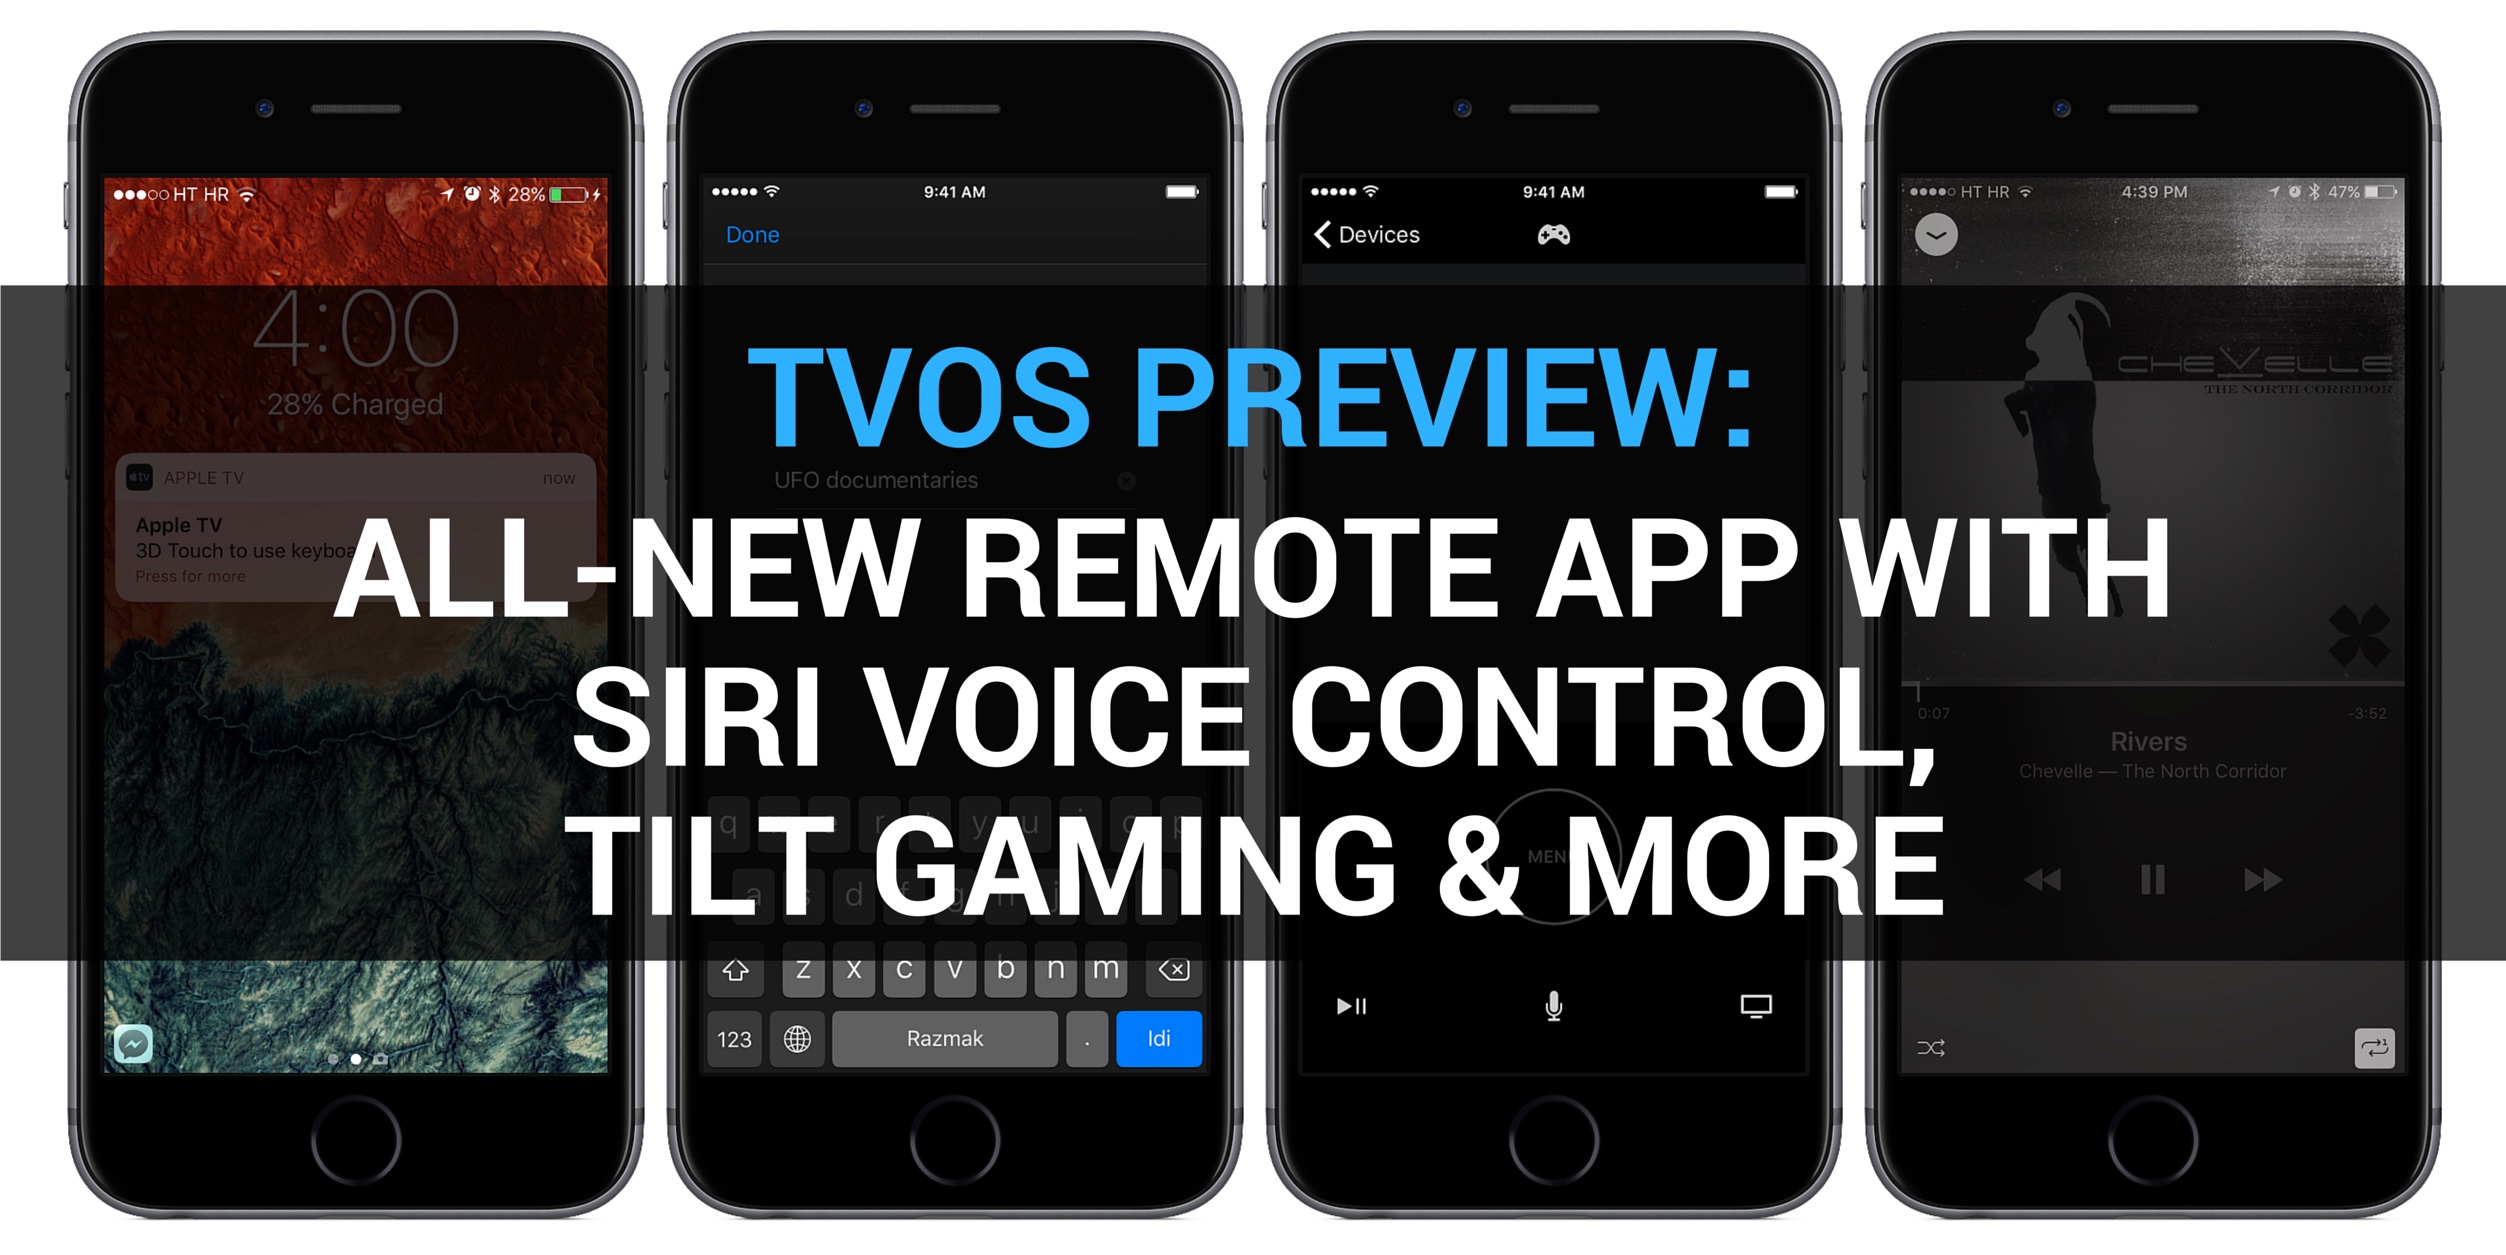 iOS 10 preview Apple Remote app teaser